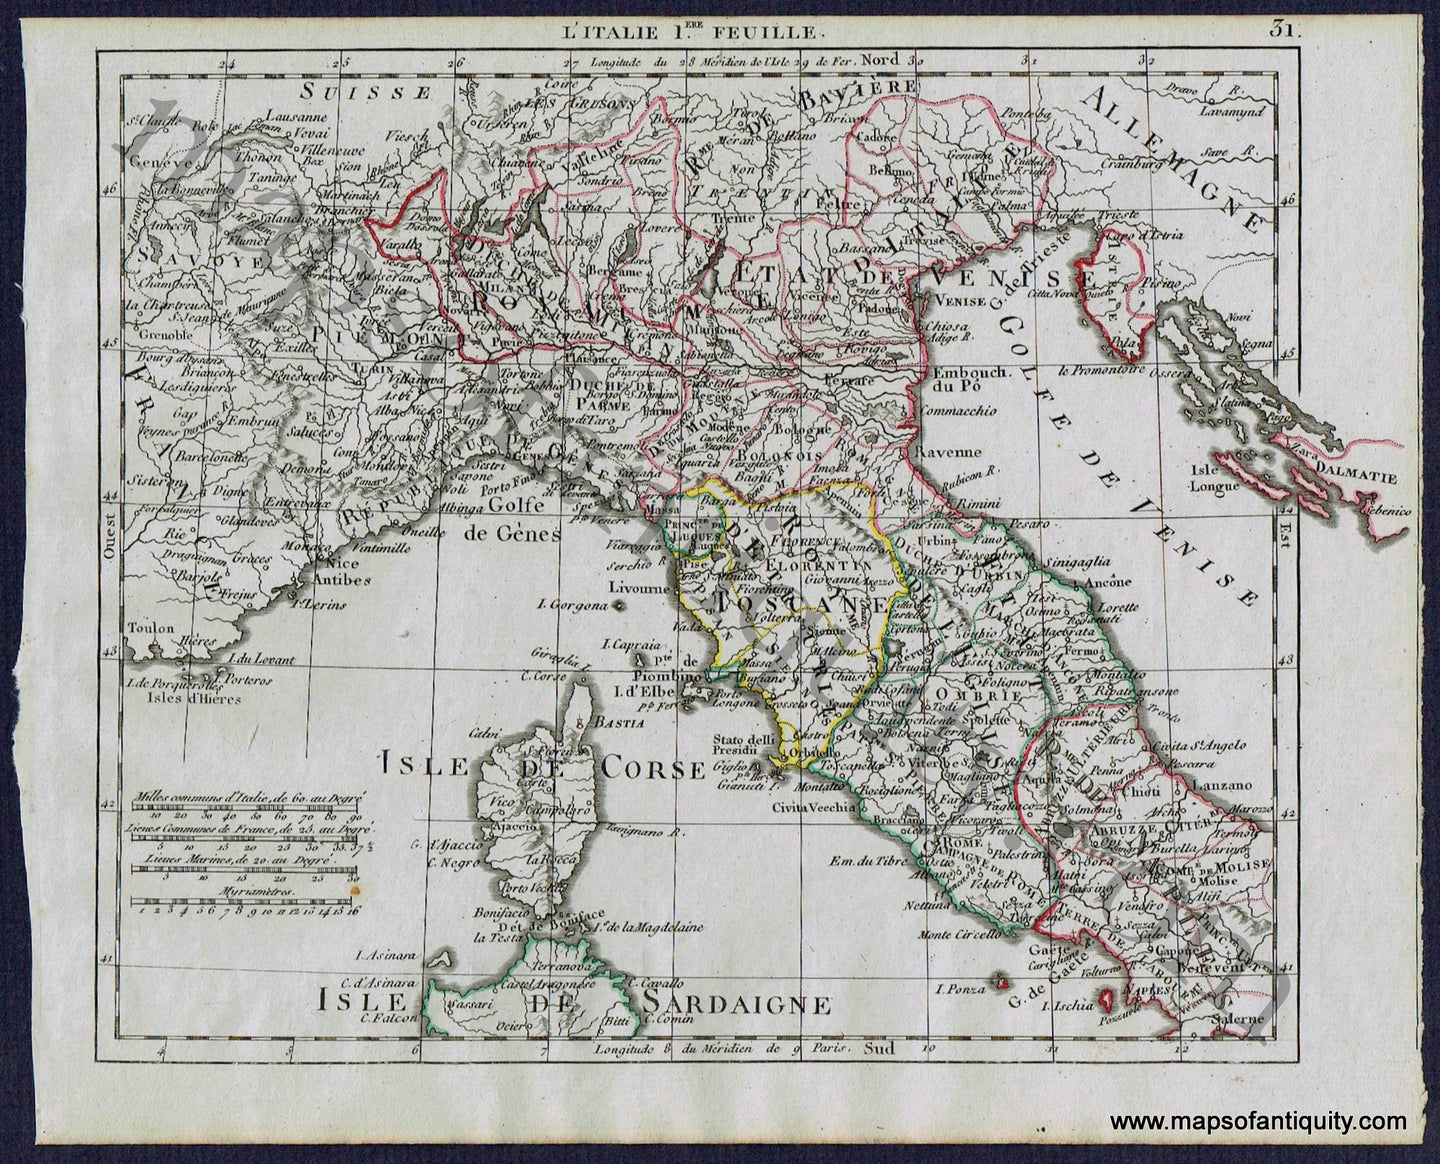 Antique-Map-northern-North-Italy-L'Italie-1-Feuille-Herrison-French-1806-1800s-Early-19th-Century-Maps-of-Antiquity